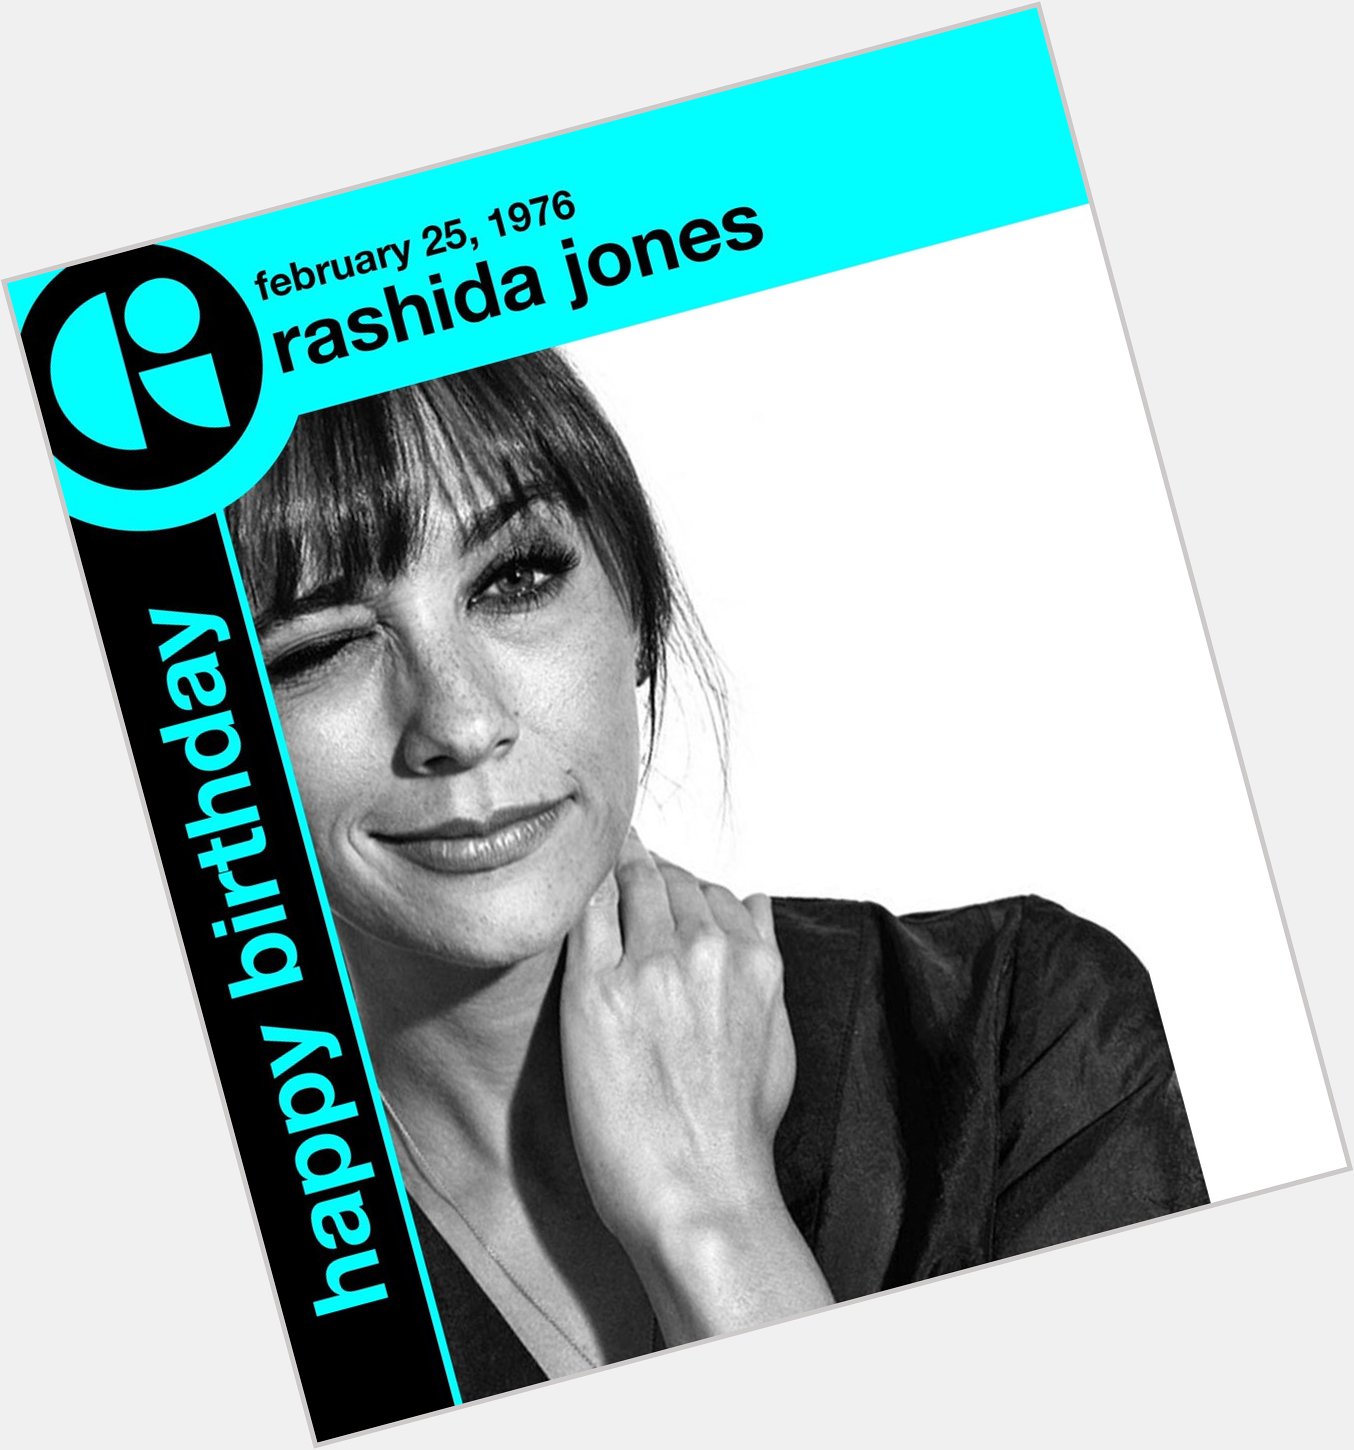 Happy birthday to Rashida Jones! We loved her in Parks and Recreation and The Office    